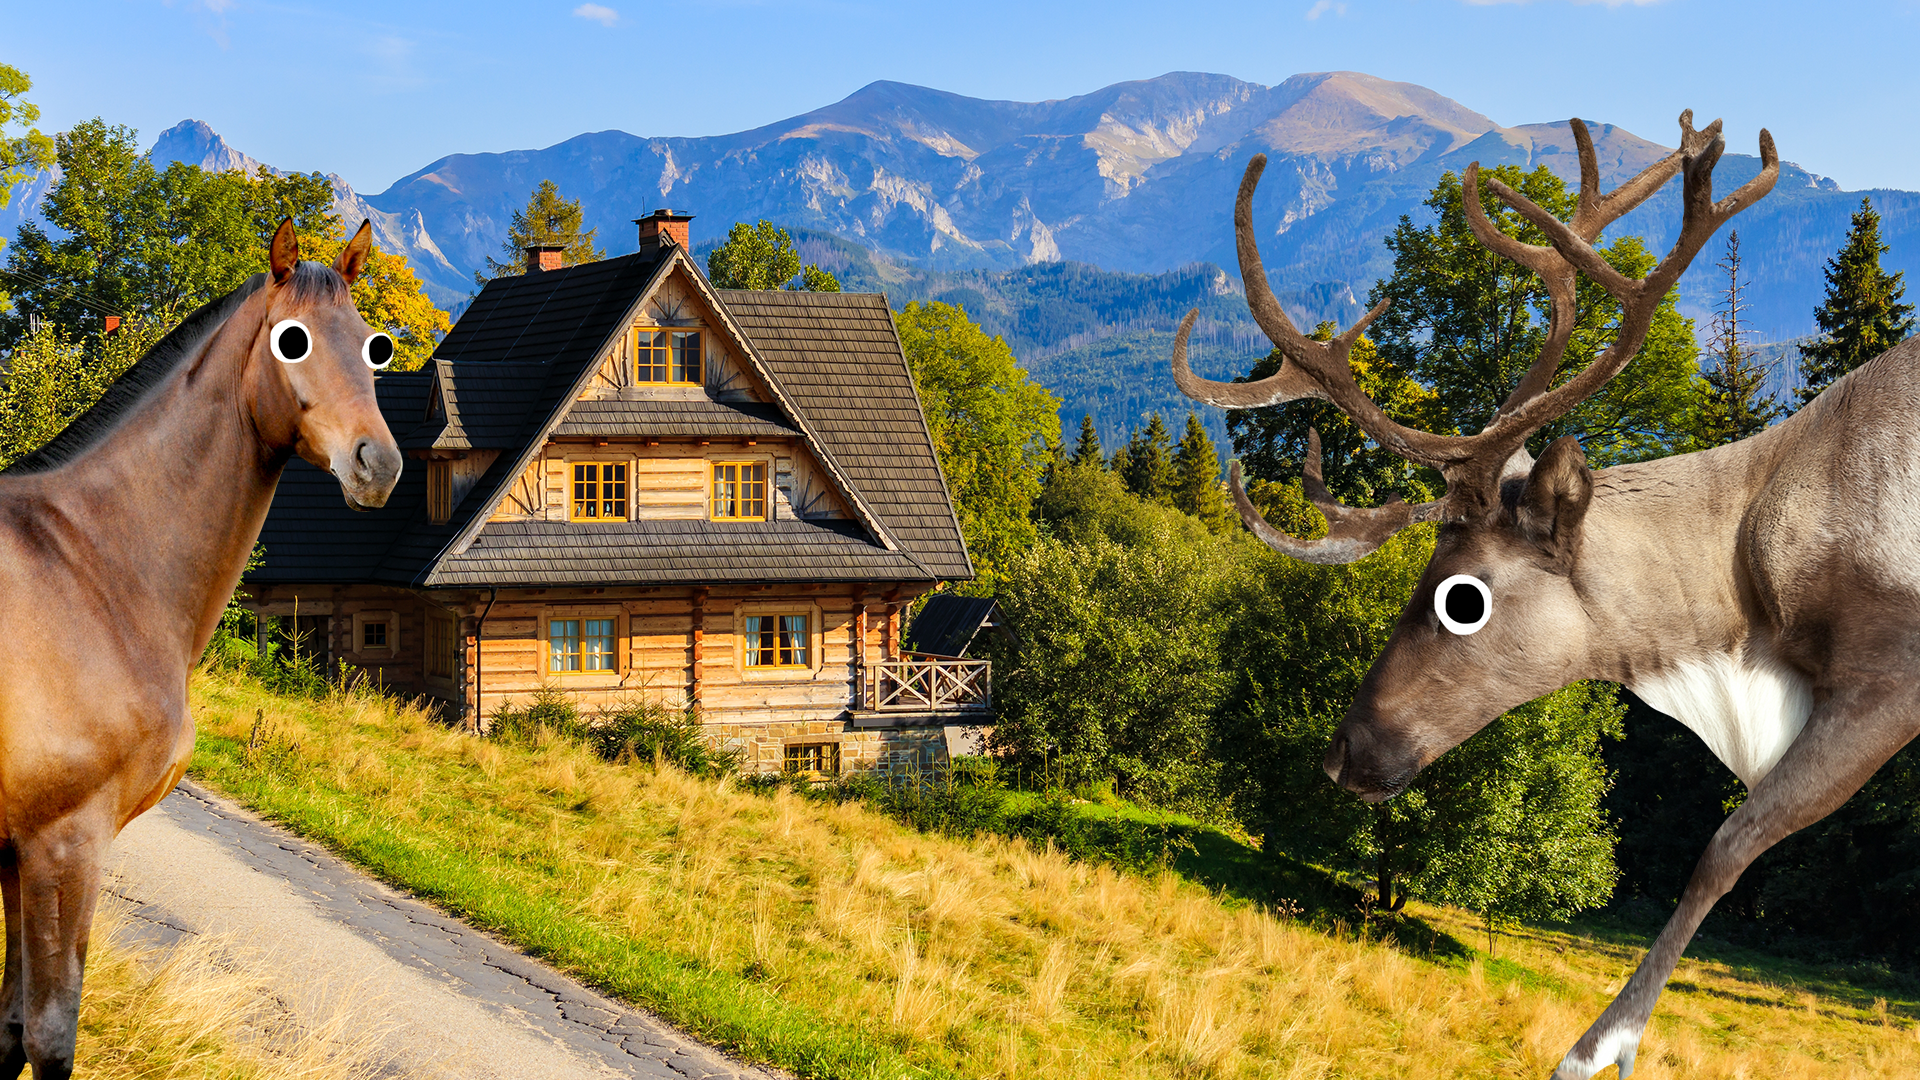 Cabin in the woods with Beano deer and horse